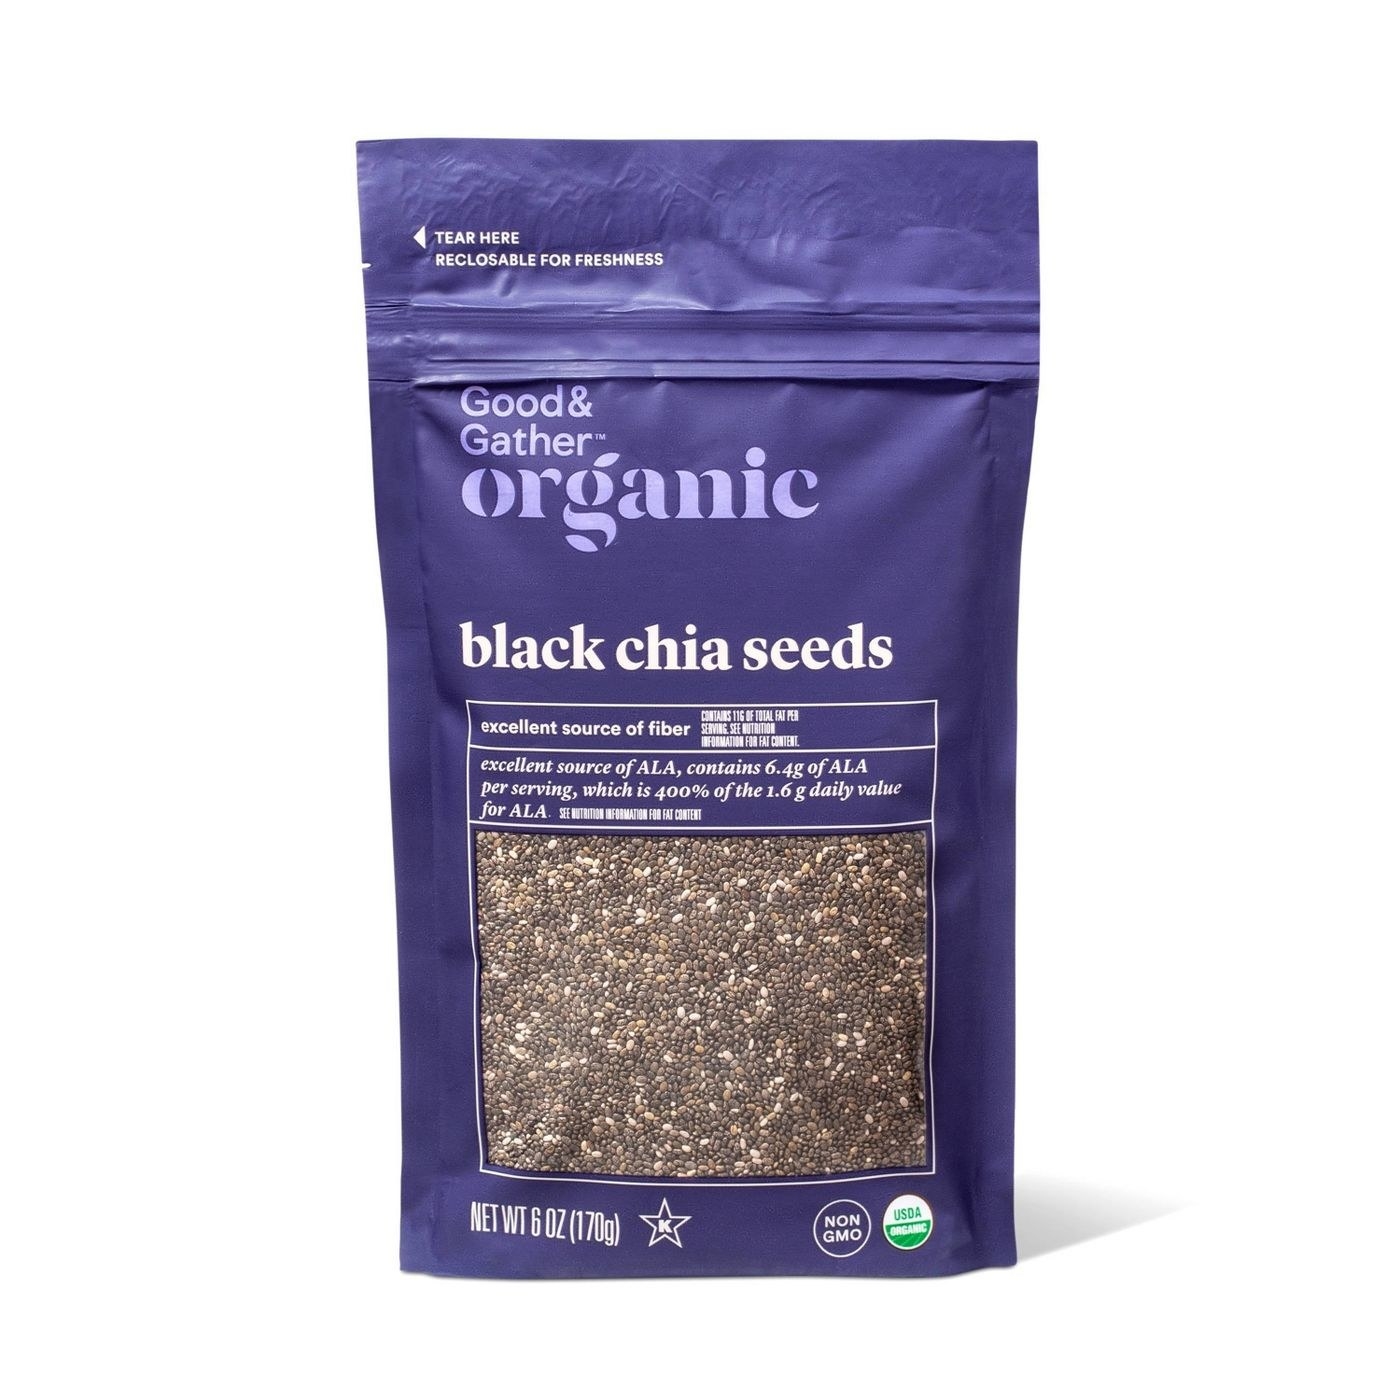 the chia seeds